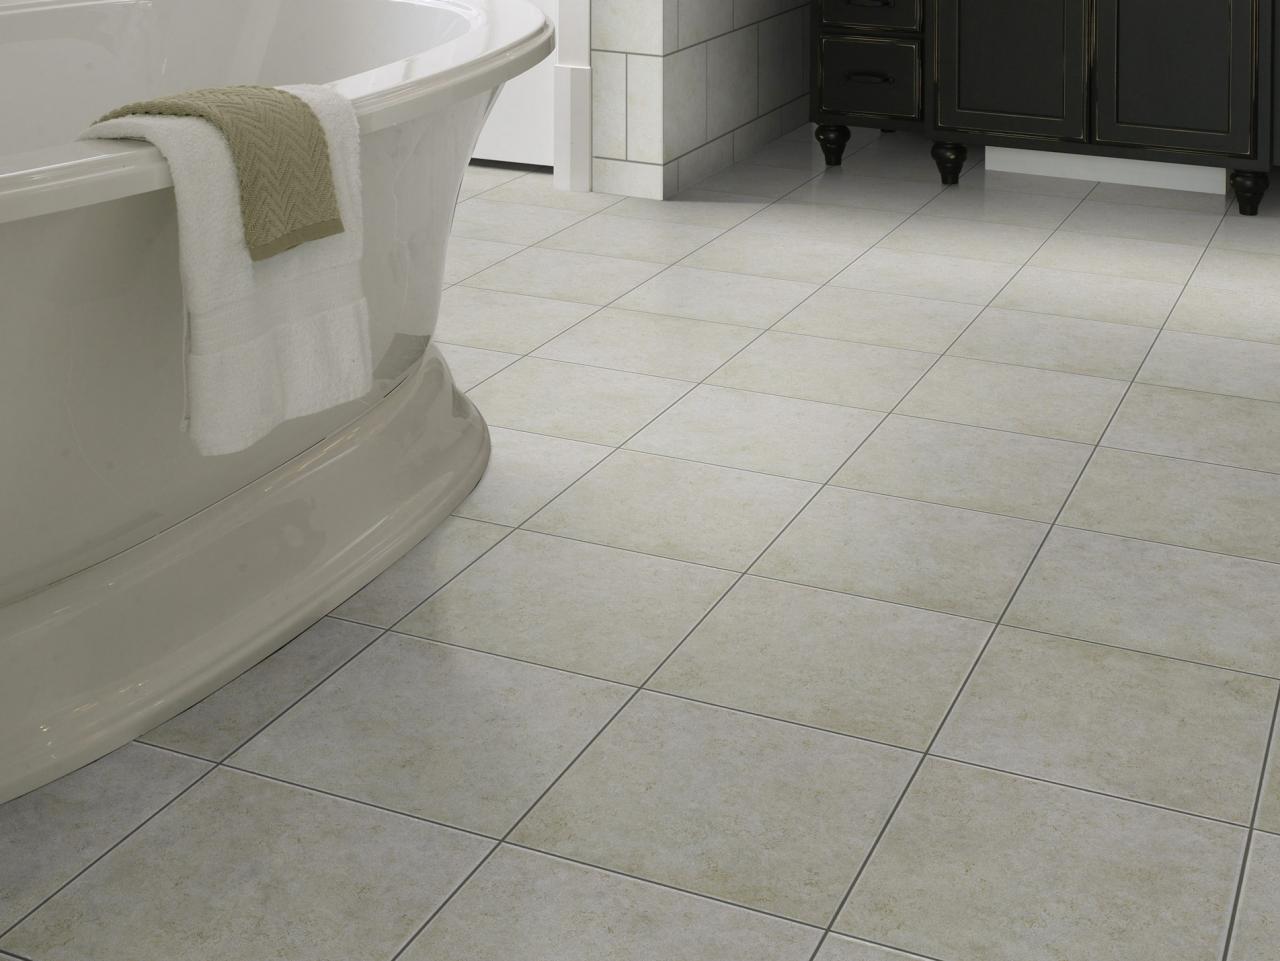 Why Homeowners Love Ceramic Tile, Cost To Install Bathroom Floor Tile Per Square Foot